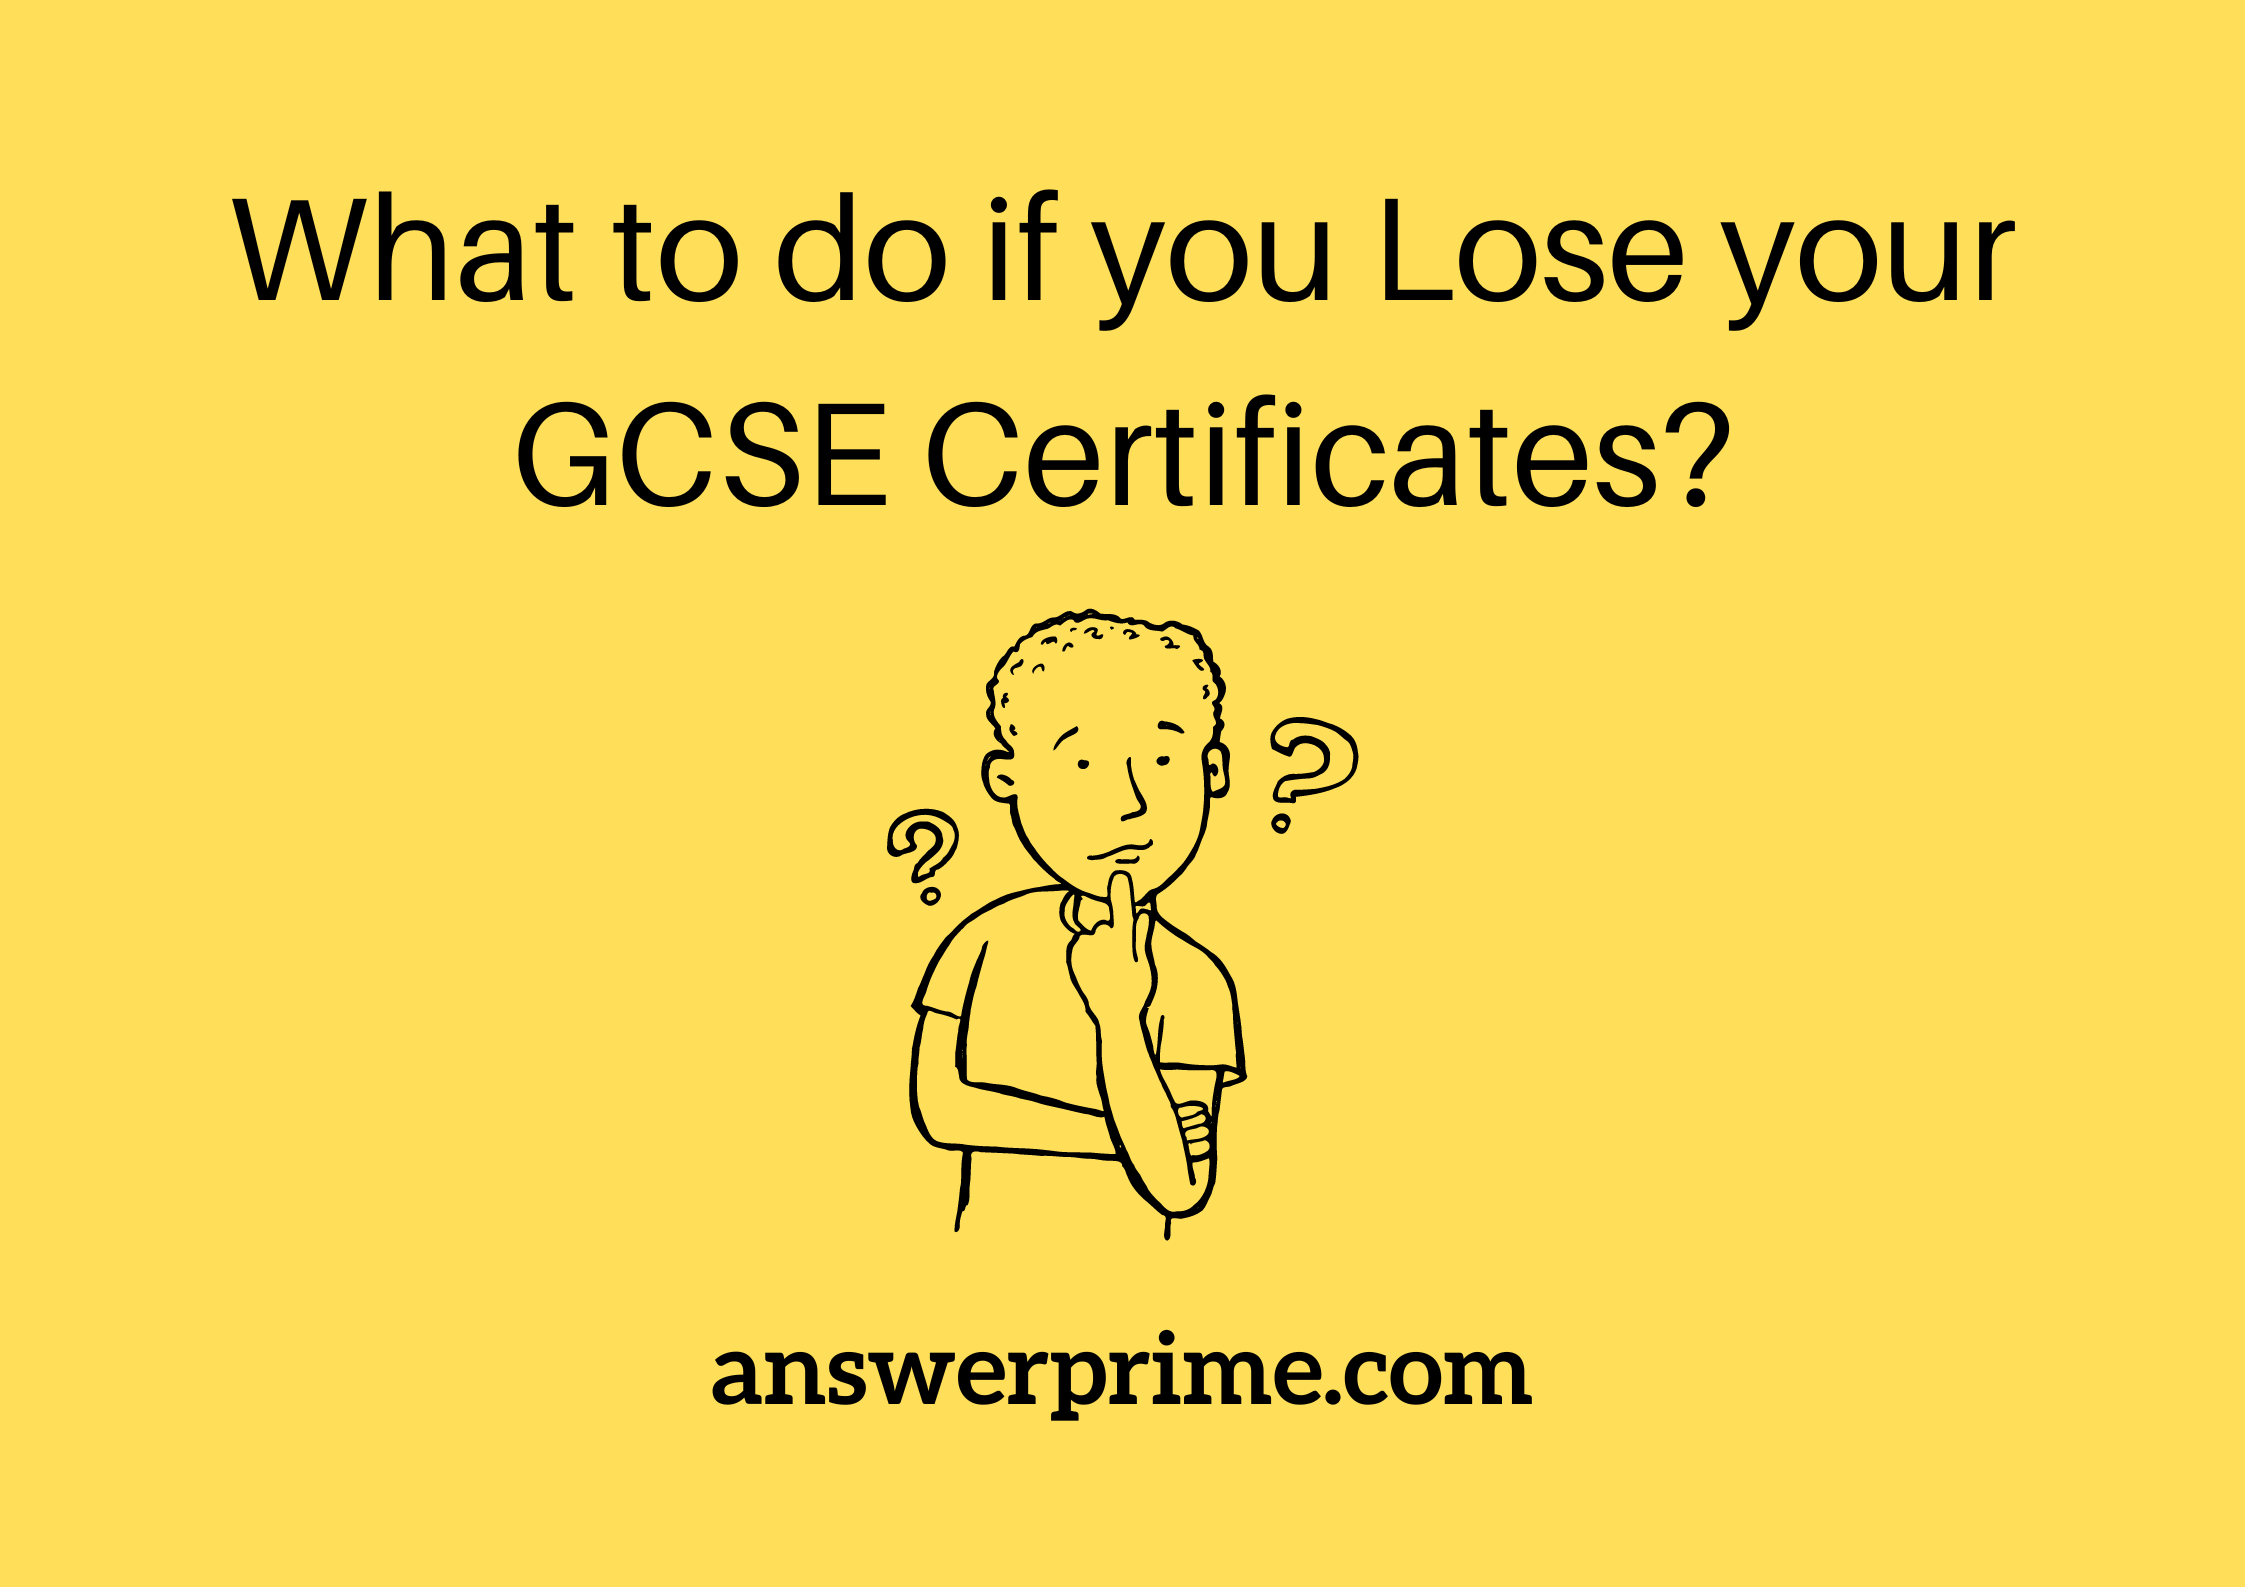 What to do if you Lose your GCSE Certificates?